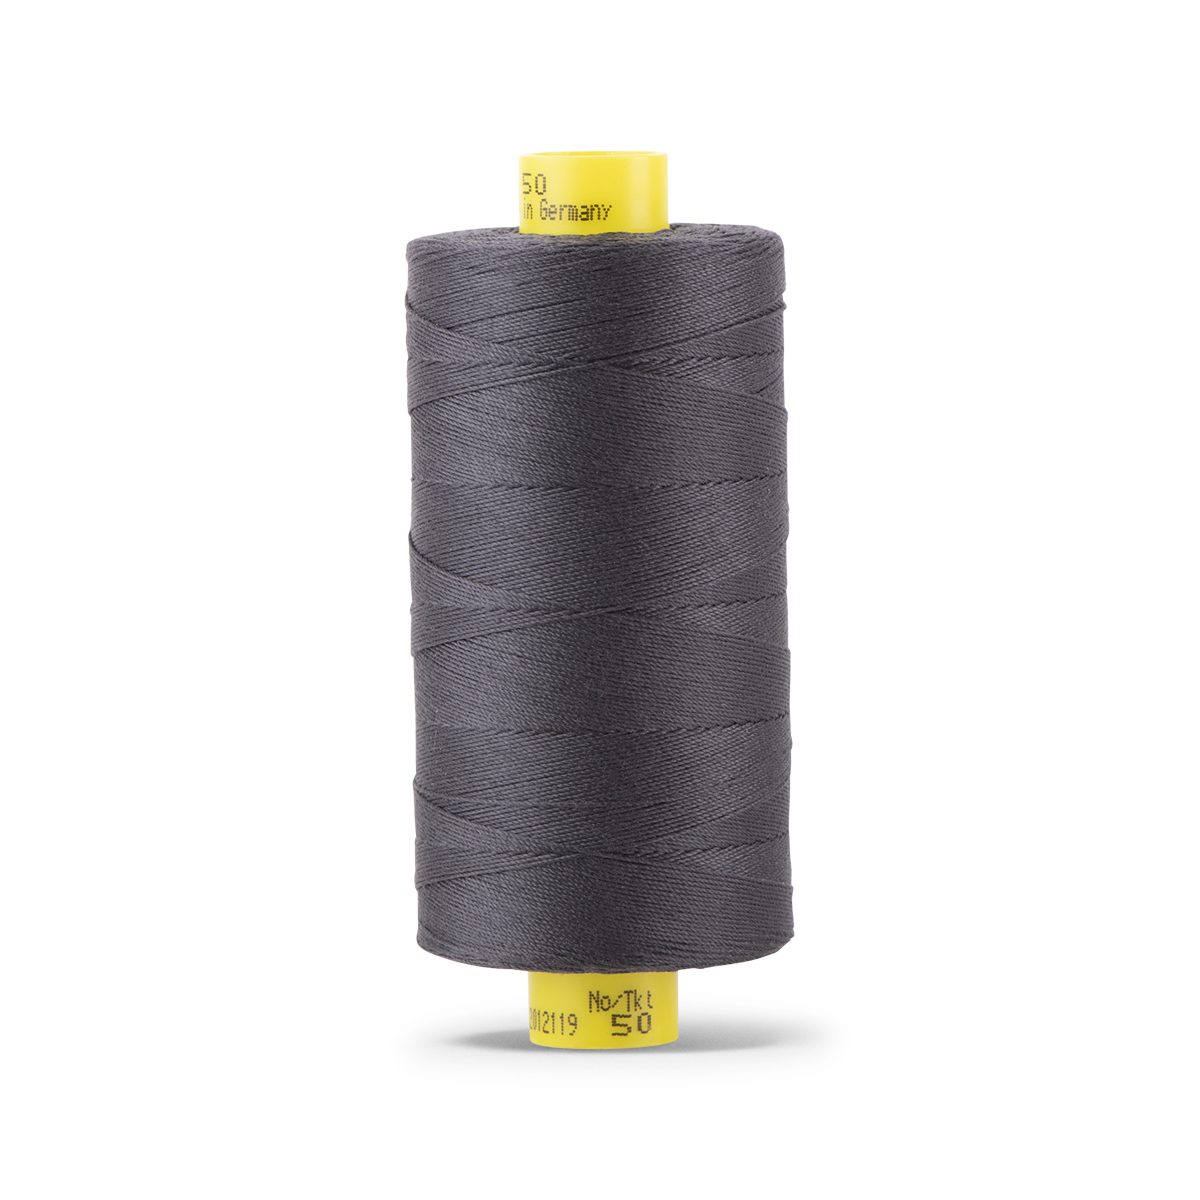 Gutermann Mara 50 Poly Wrapped Poly Core Thread - Tex 60 - 546 yds. - #000